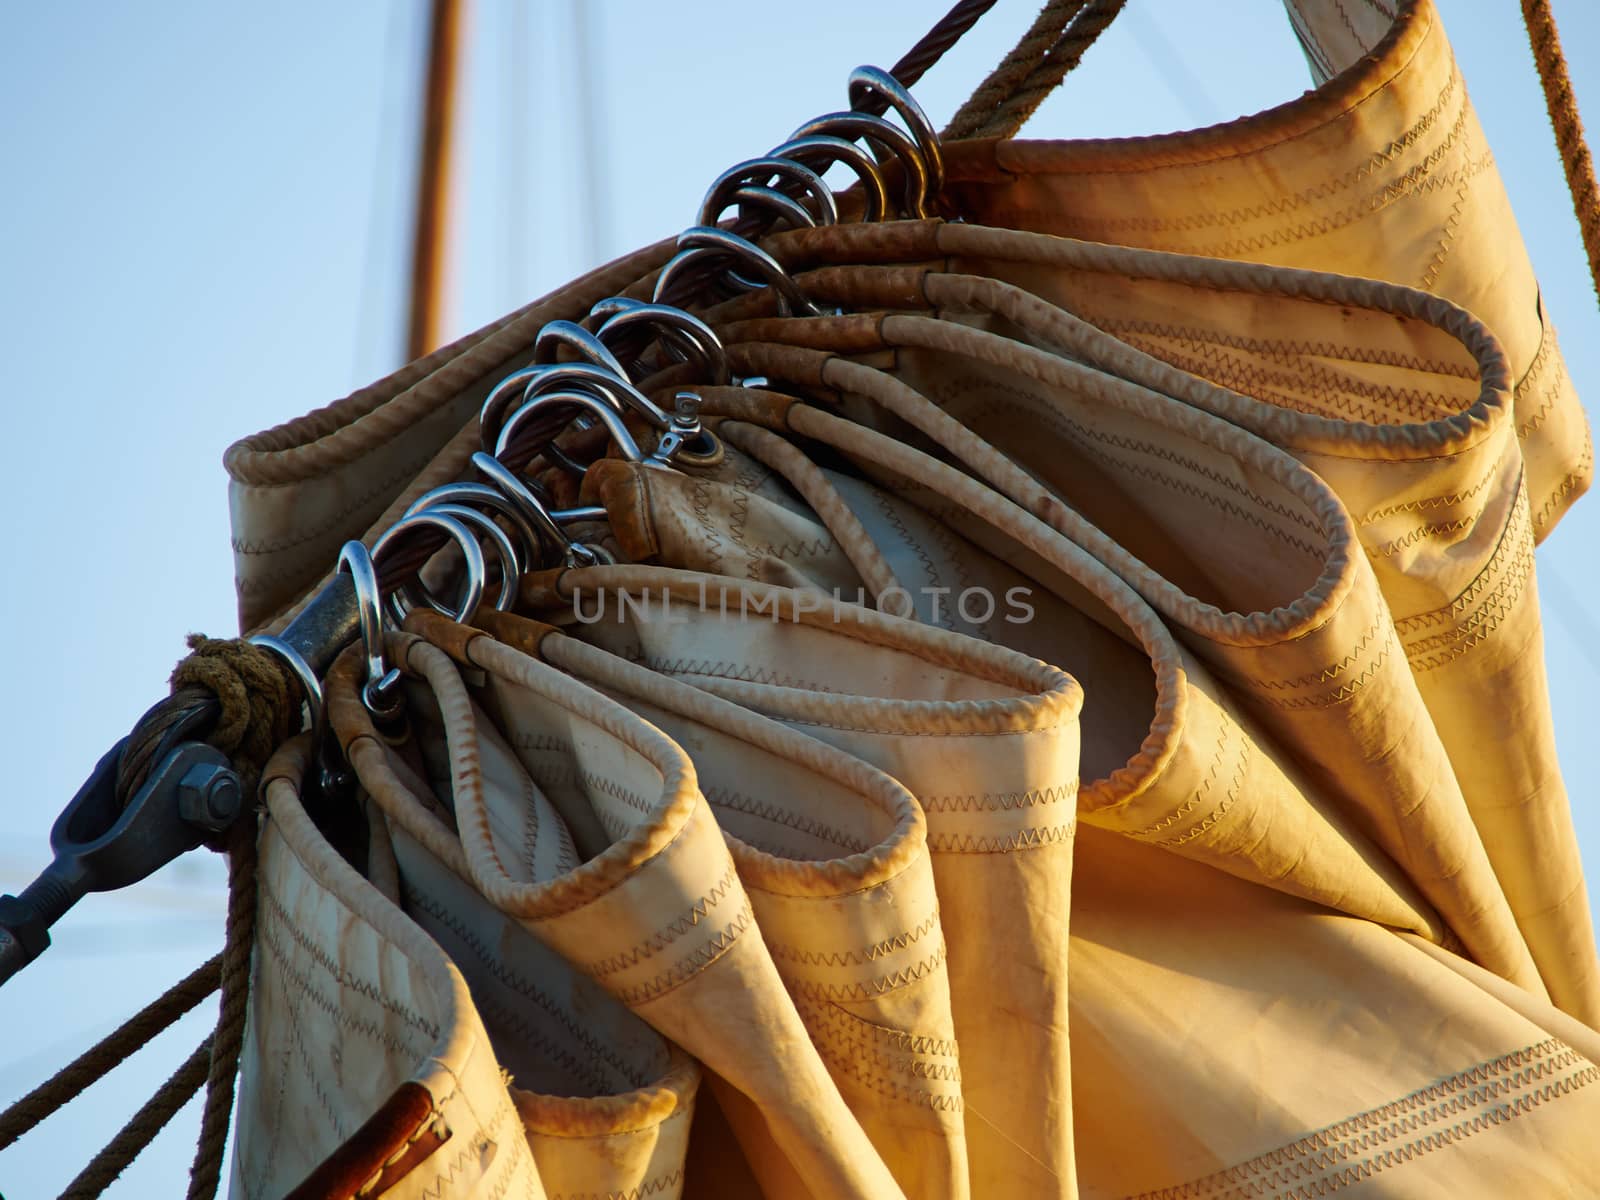 Details of gathered sail of a large classical traditional vintage tall sailing ship